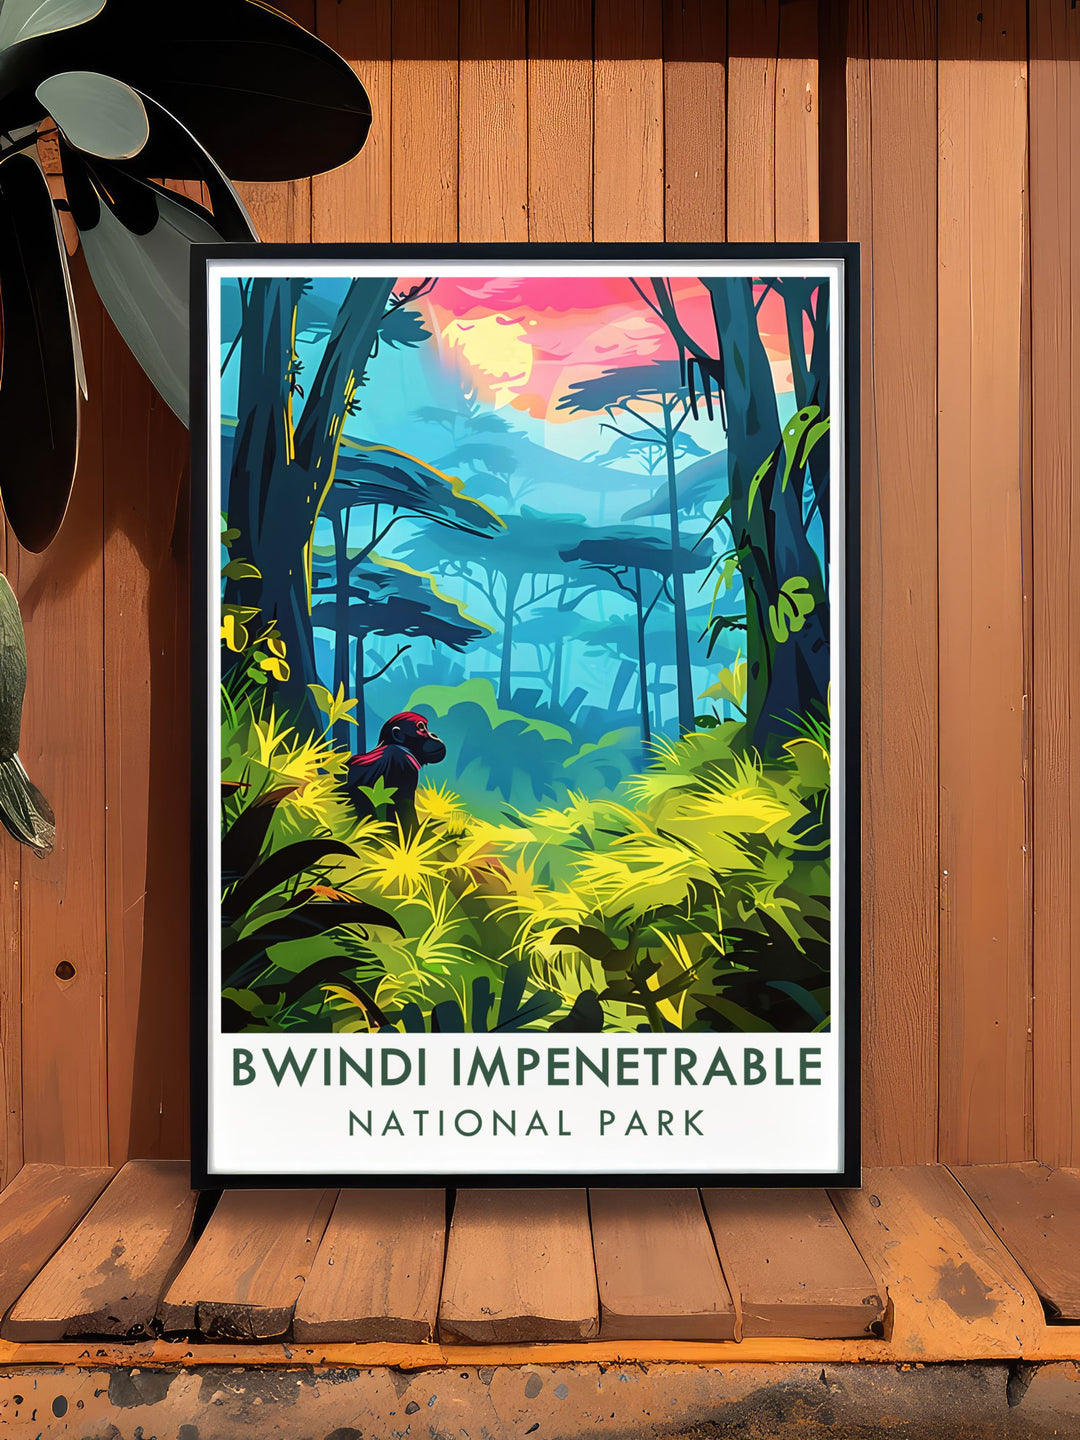 Highlighting the majestic mountain gorillas, this art print brings the beauty and wonder of Bwindis wildlife into your home, perfect for nature lovers and wildlife enthusiasts.